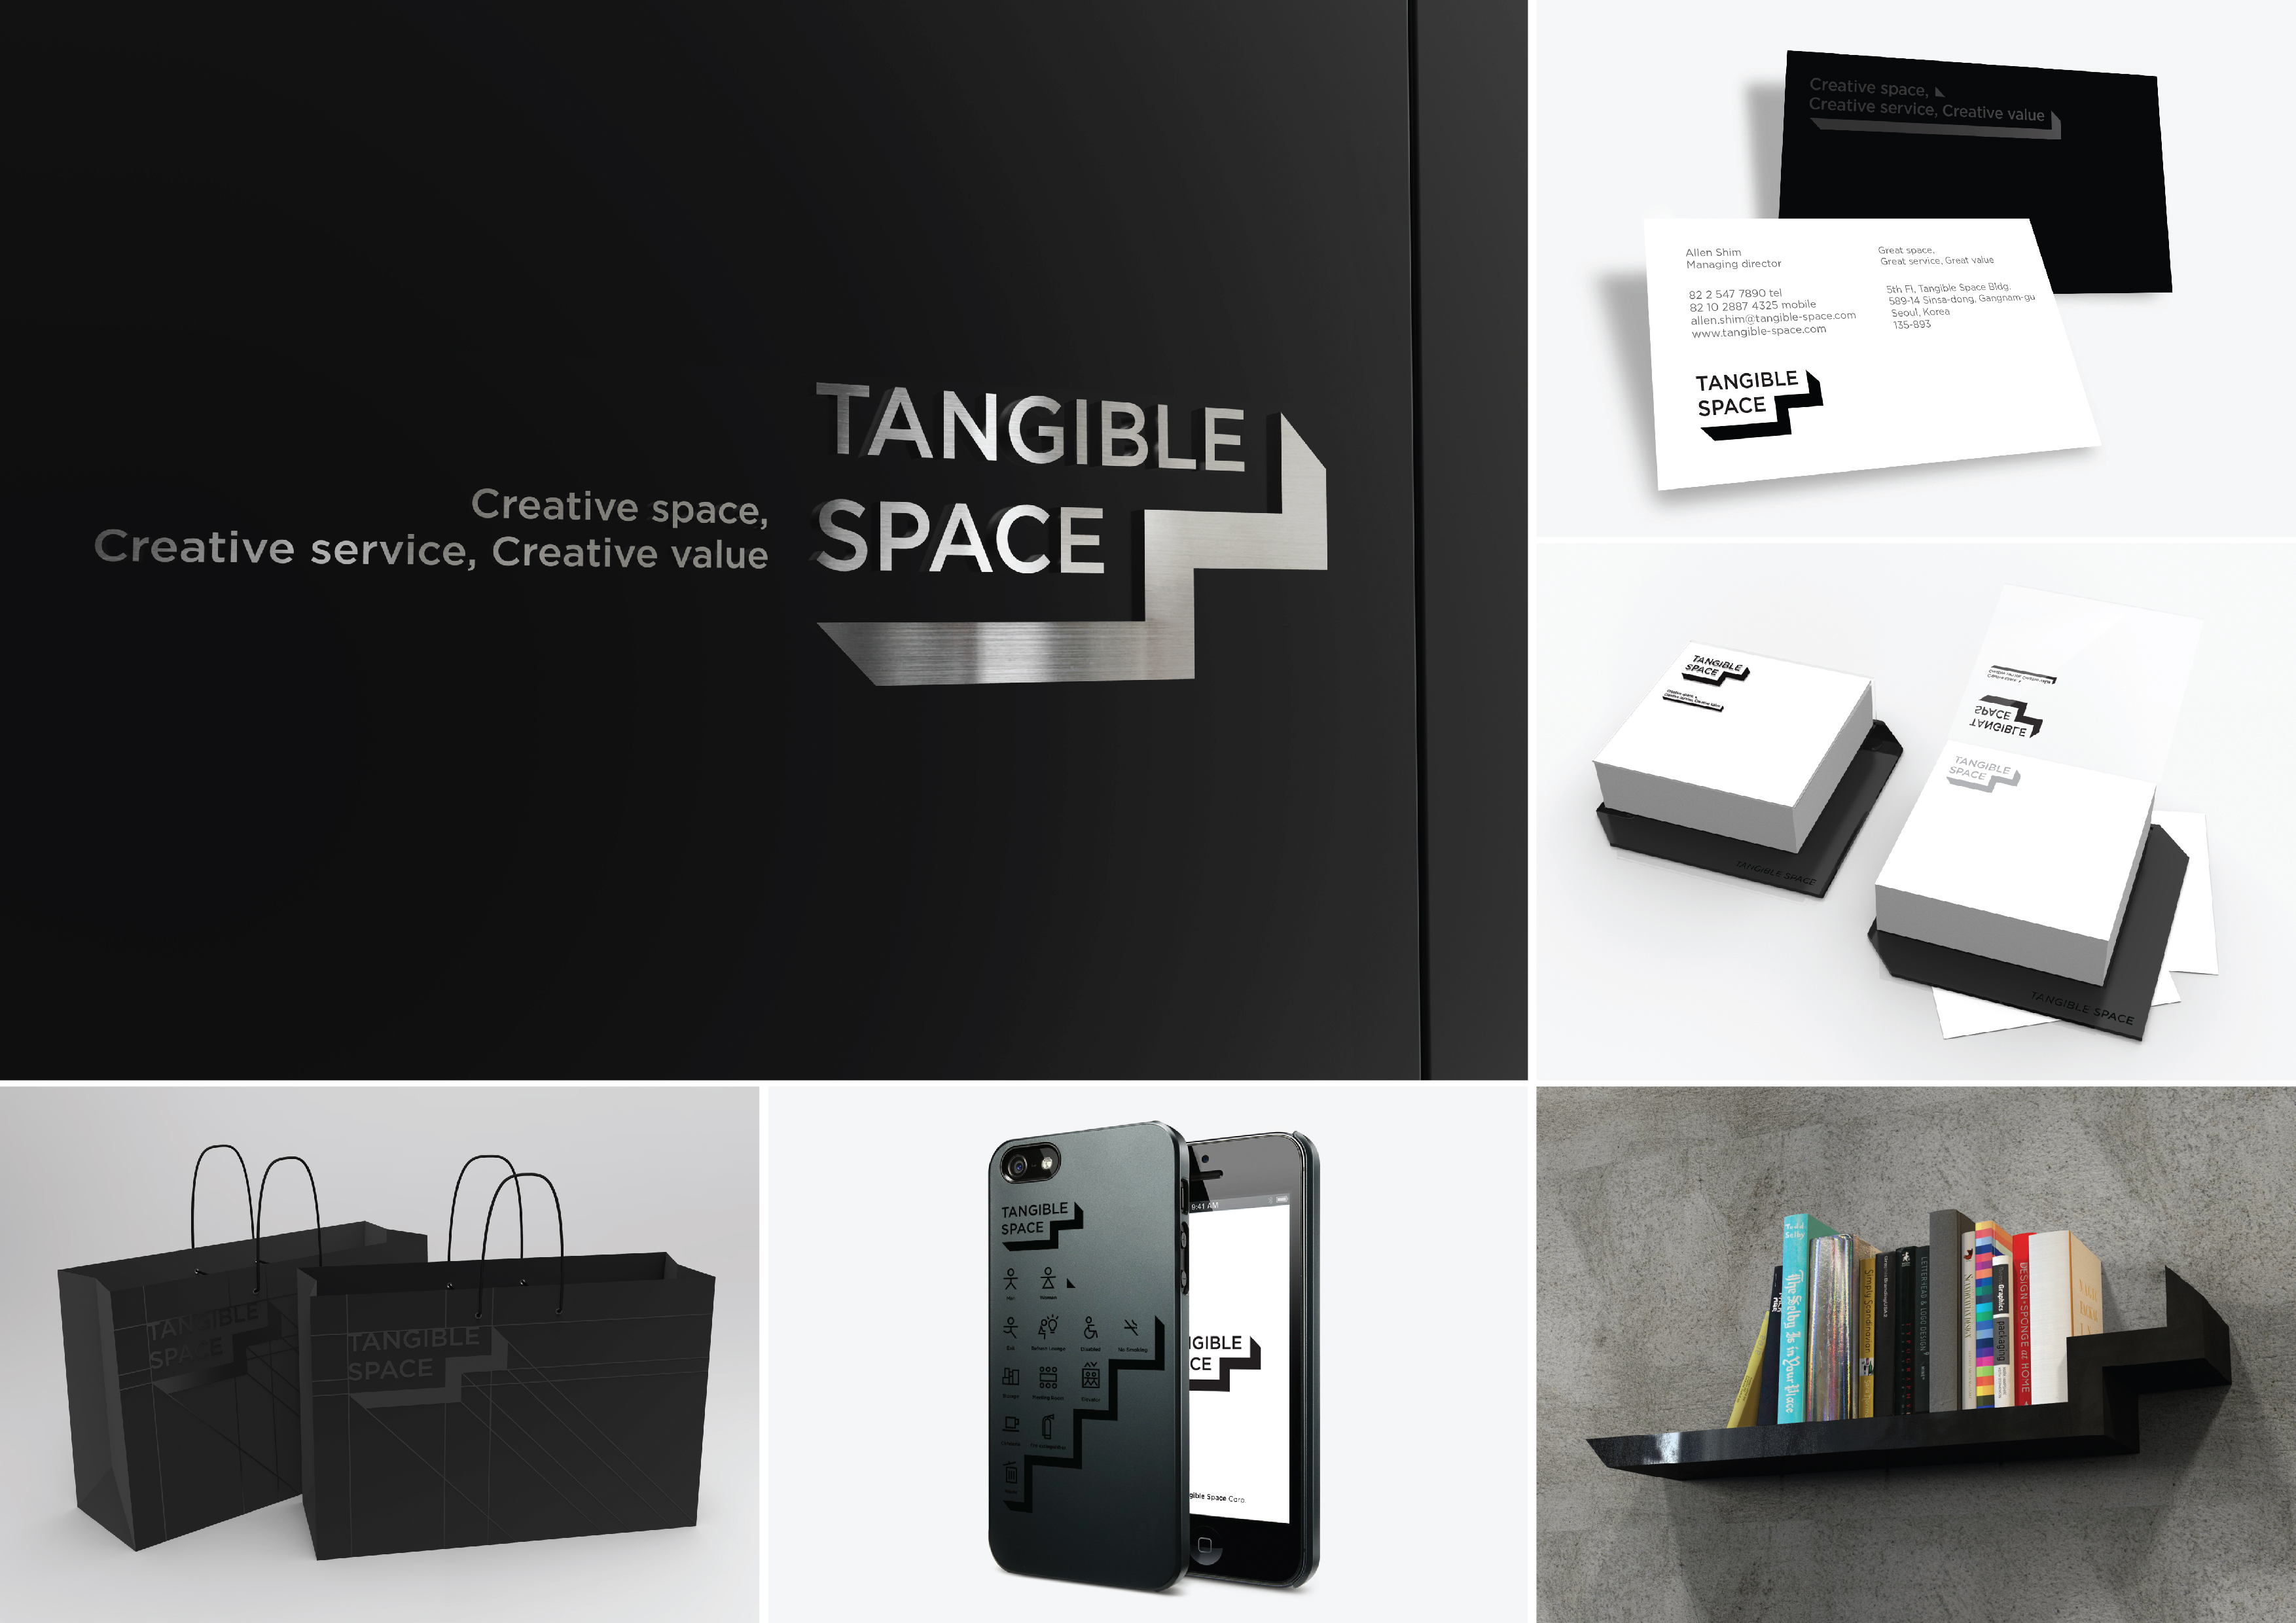 Tangible Space